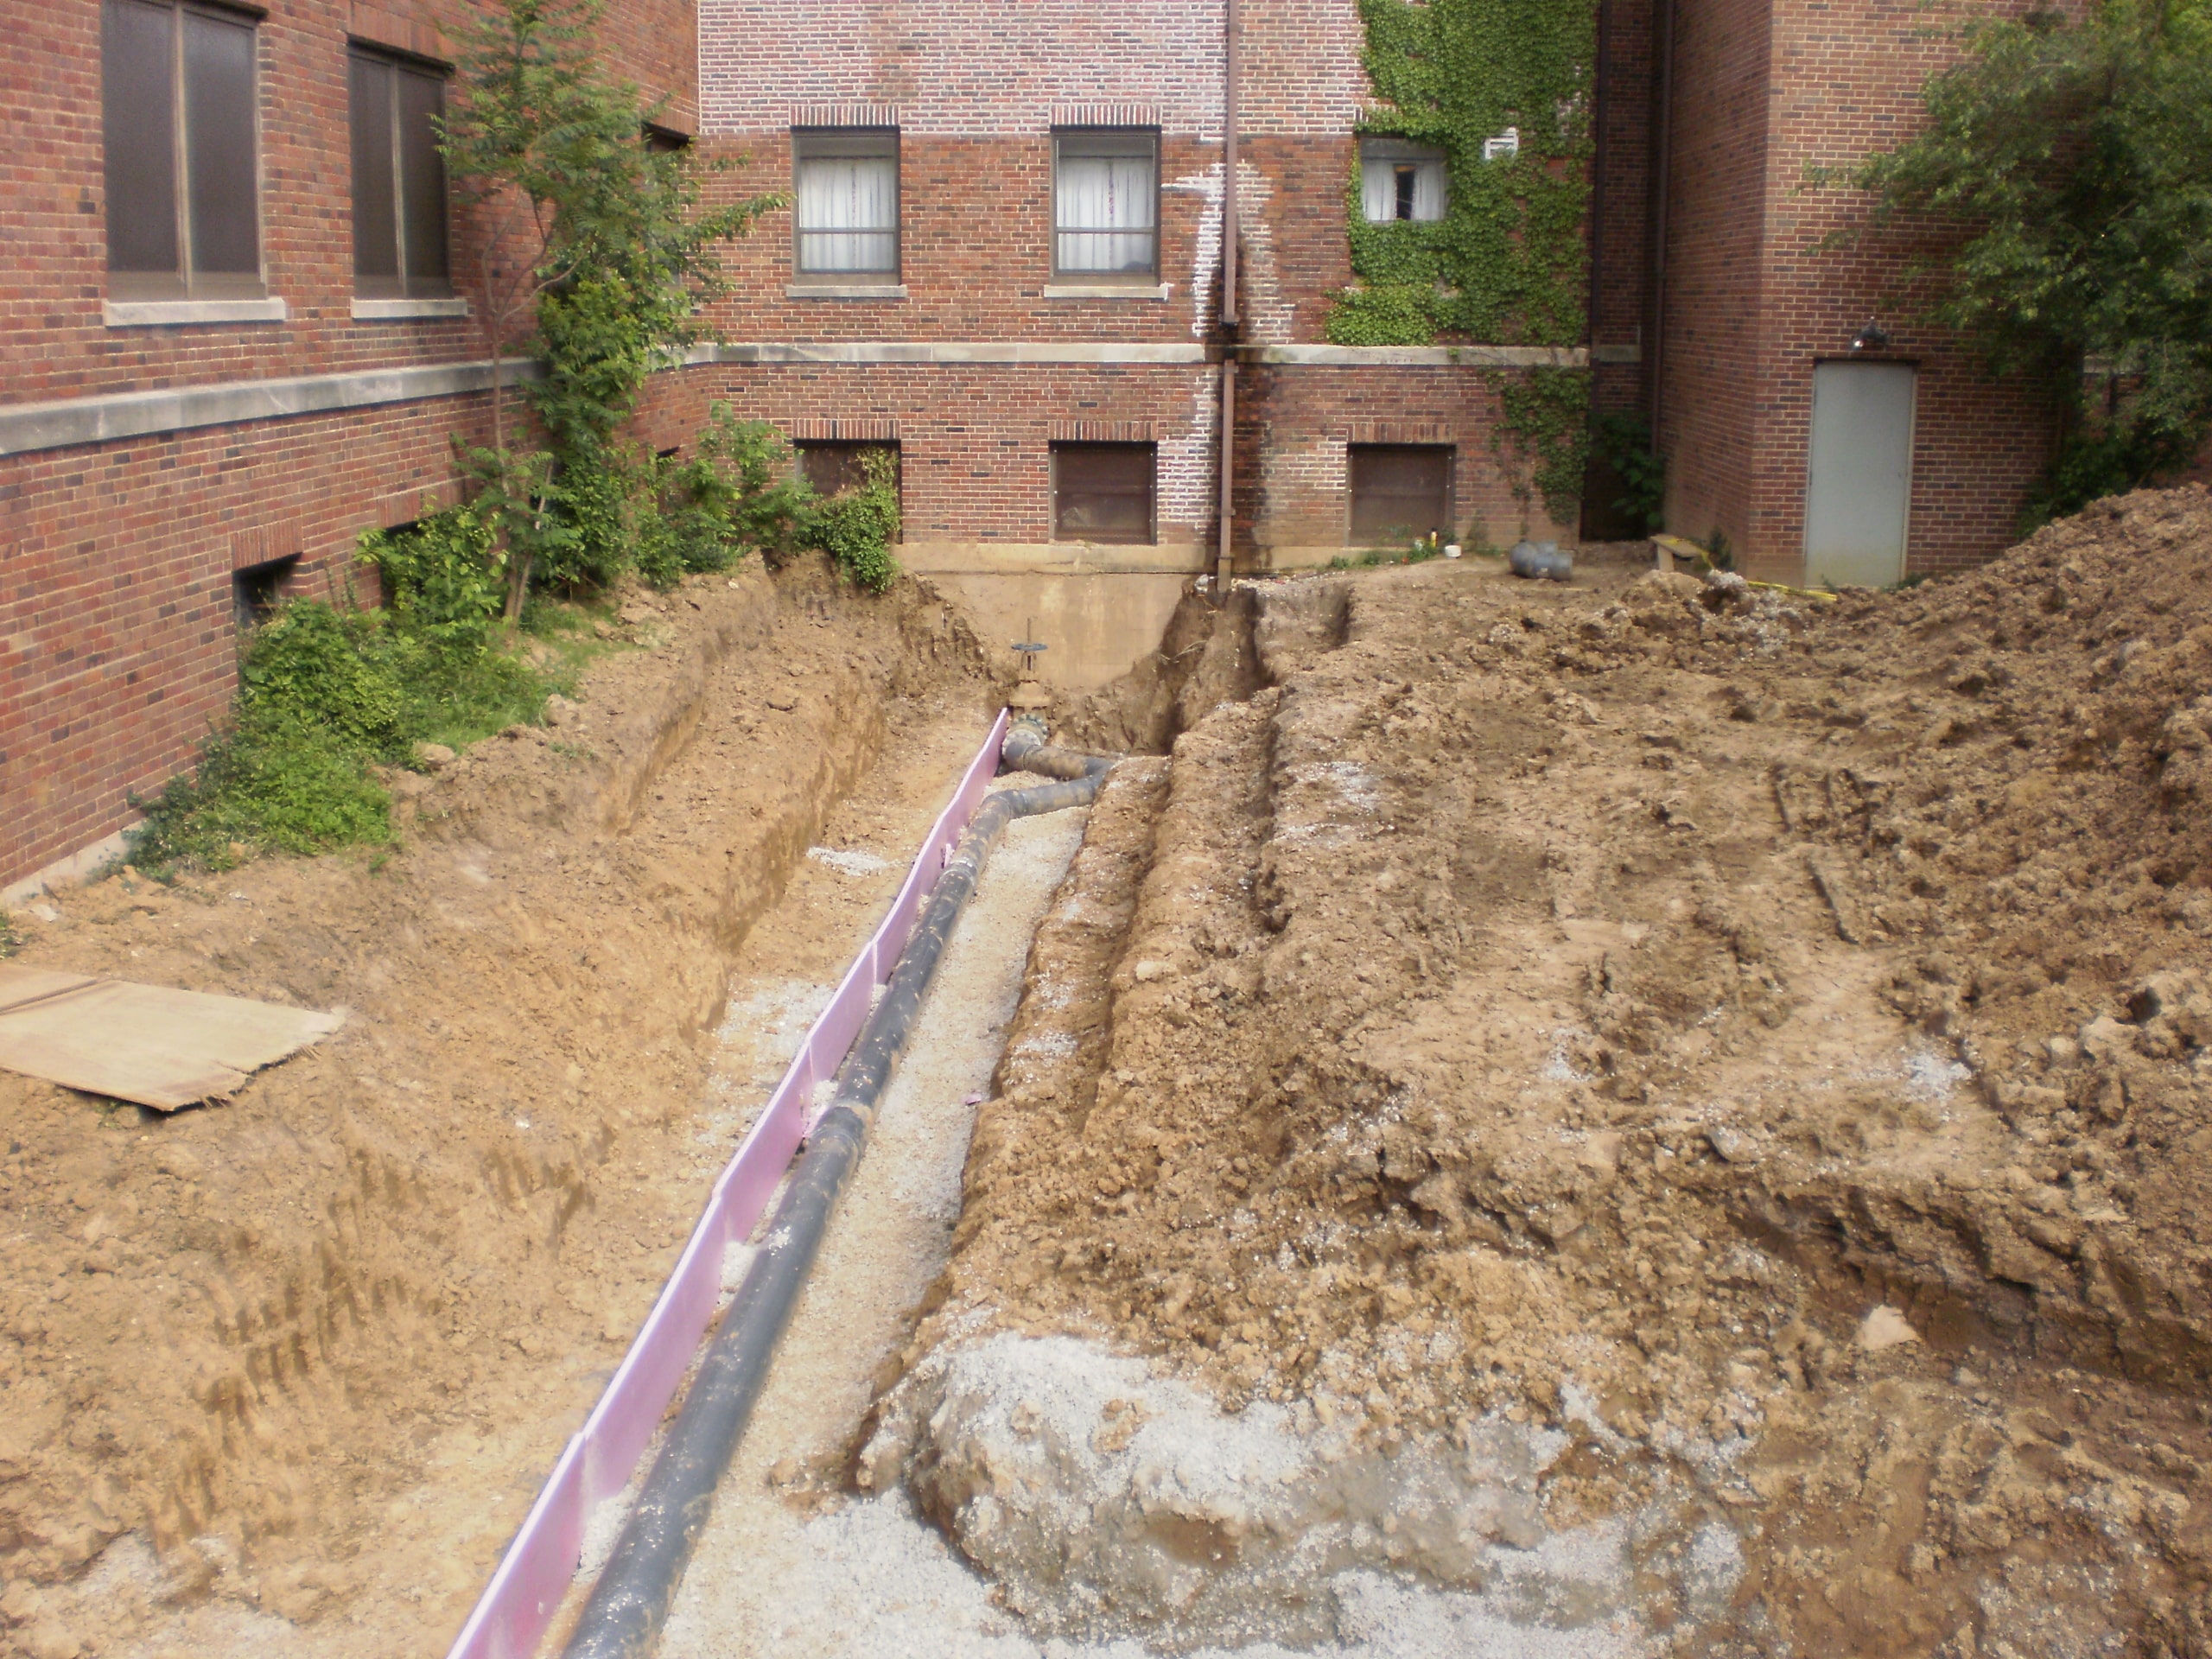 Waste Pipe Replacement Services By Hoffmann Bros. Serving St Louis